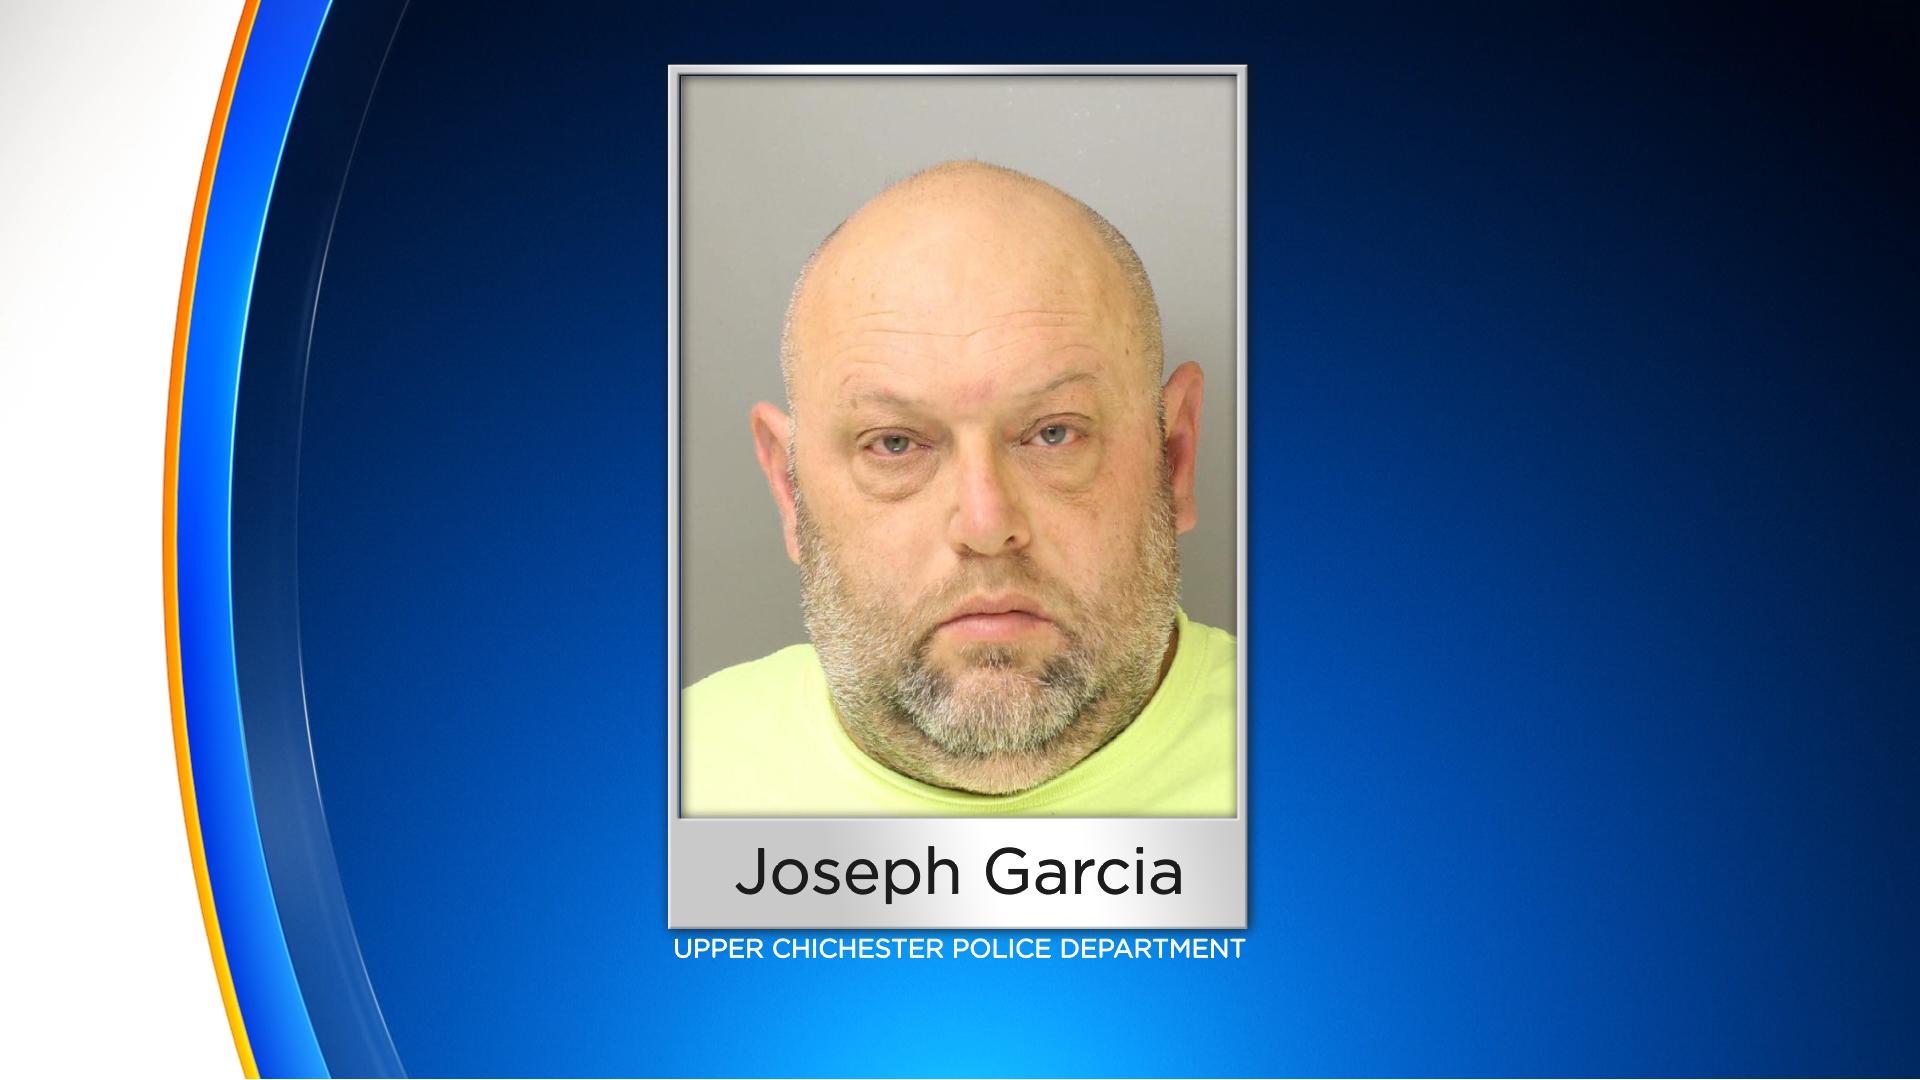 Joseph Garcia Arrested, Charged In Connection To Fatal Upper Chichester Hit-And-Run